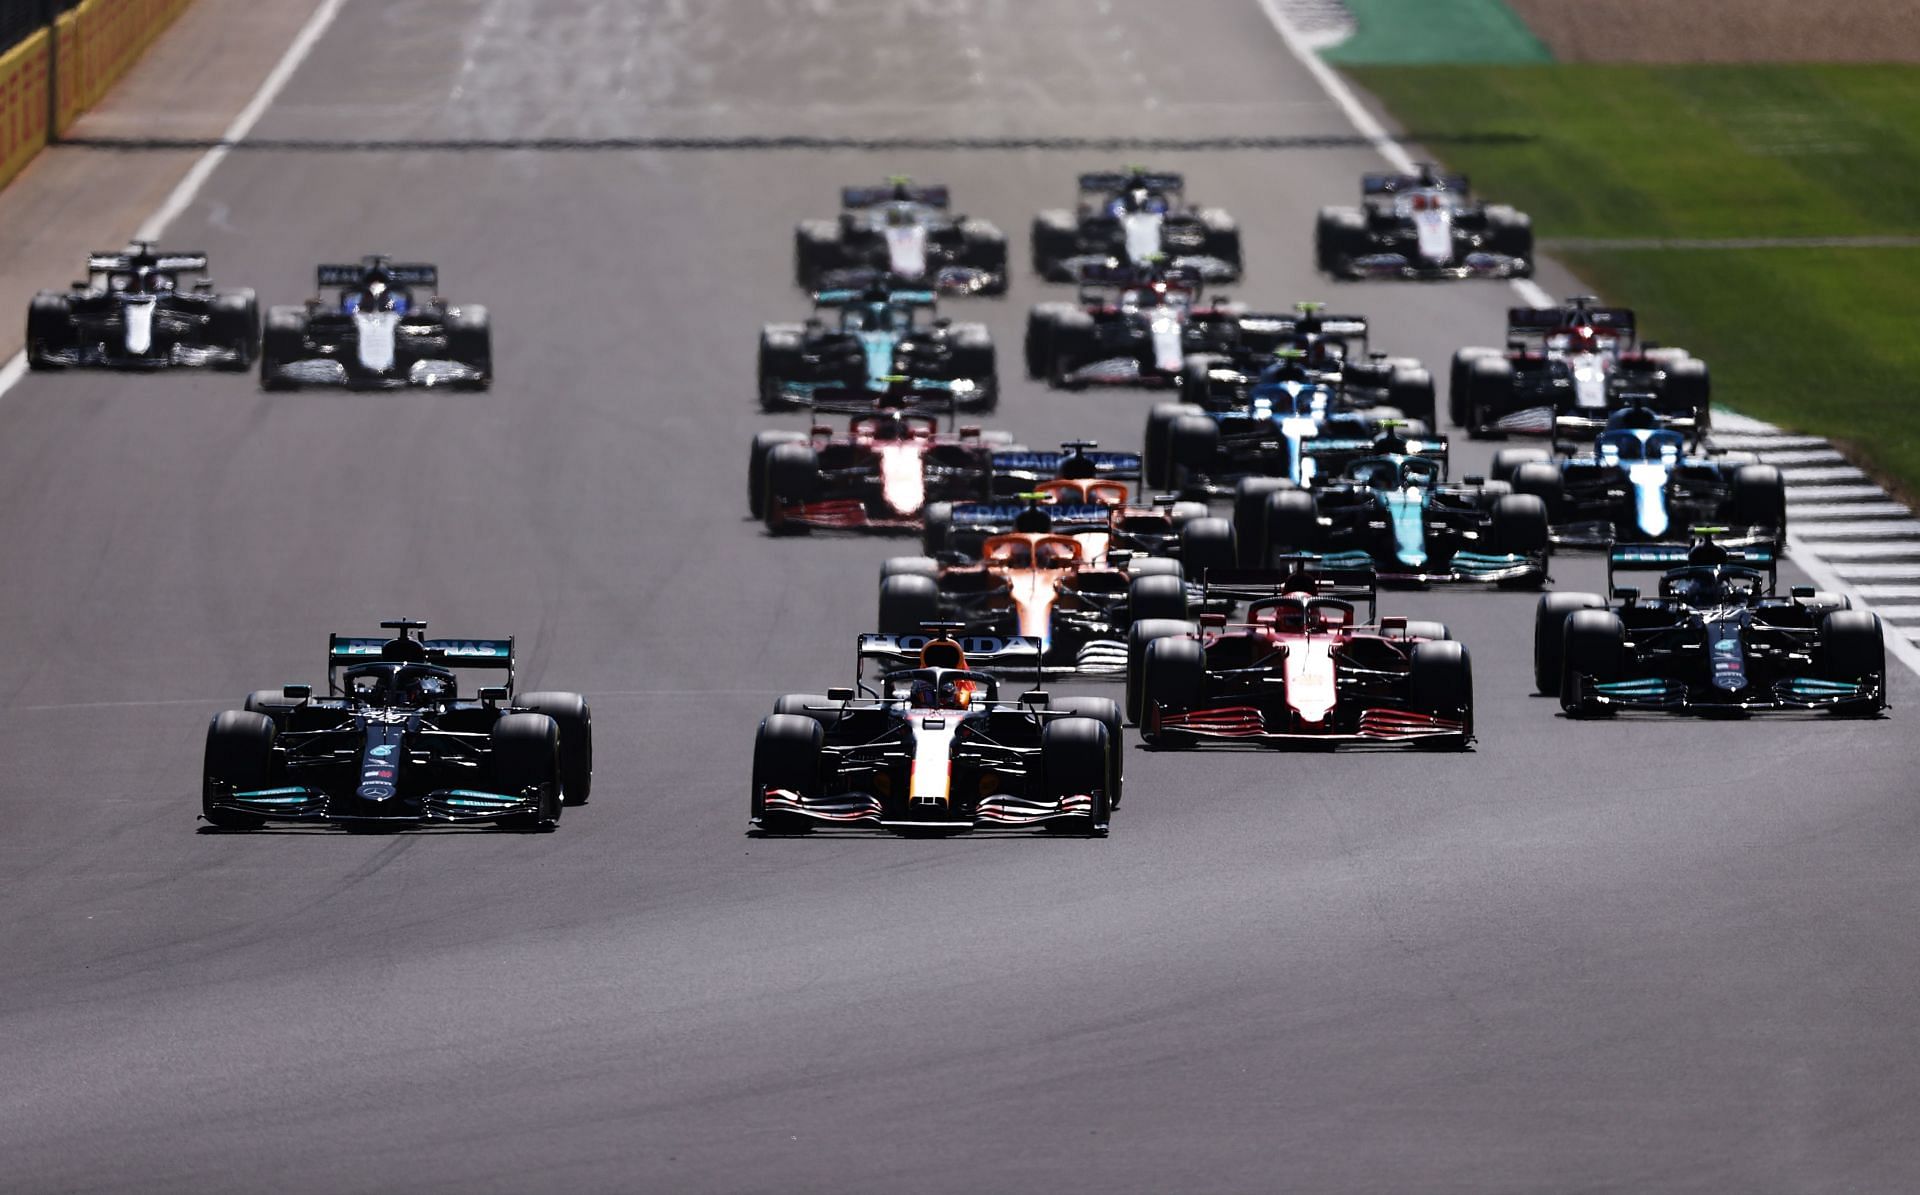 F1 2022 Where to watch British GP Qualifying? Time, TV schedule, live stream details, and more